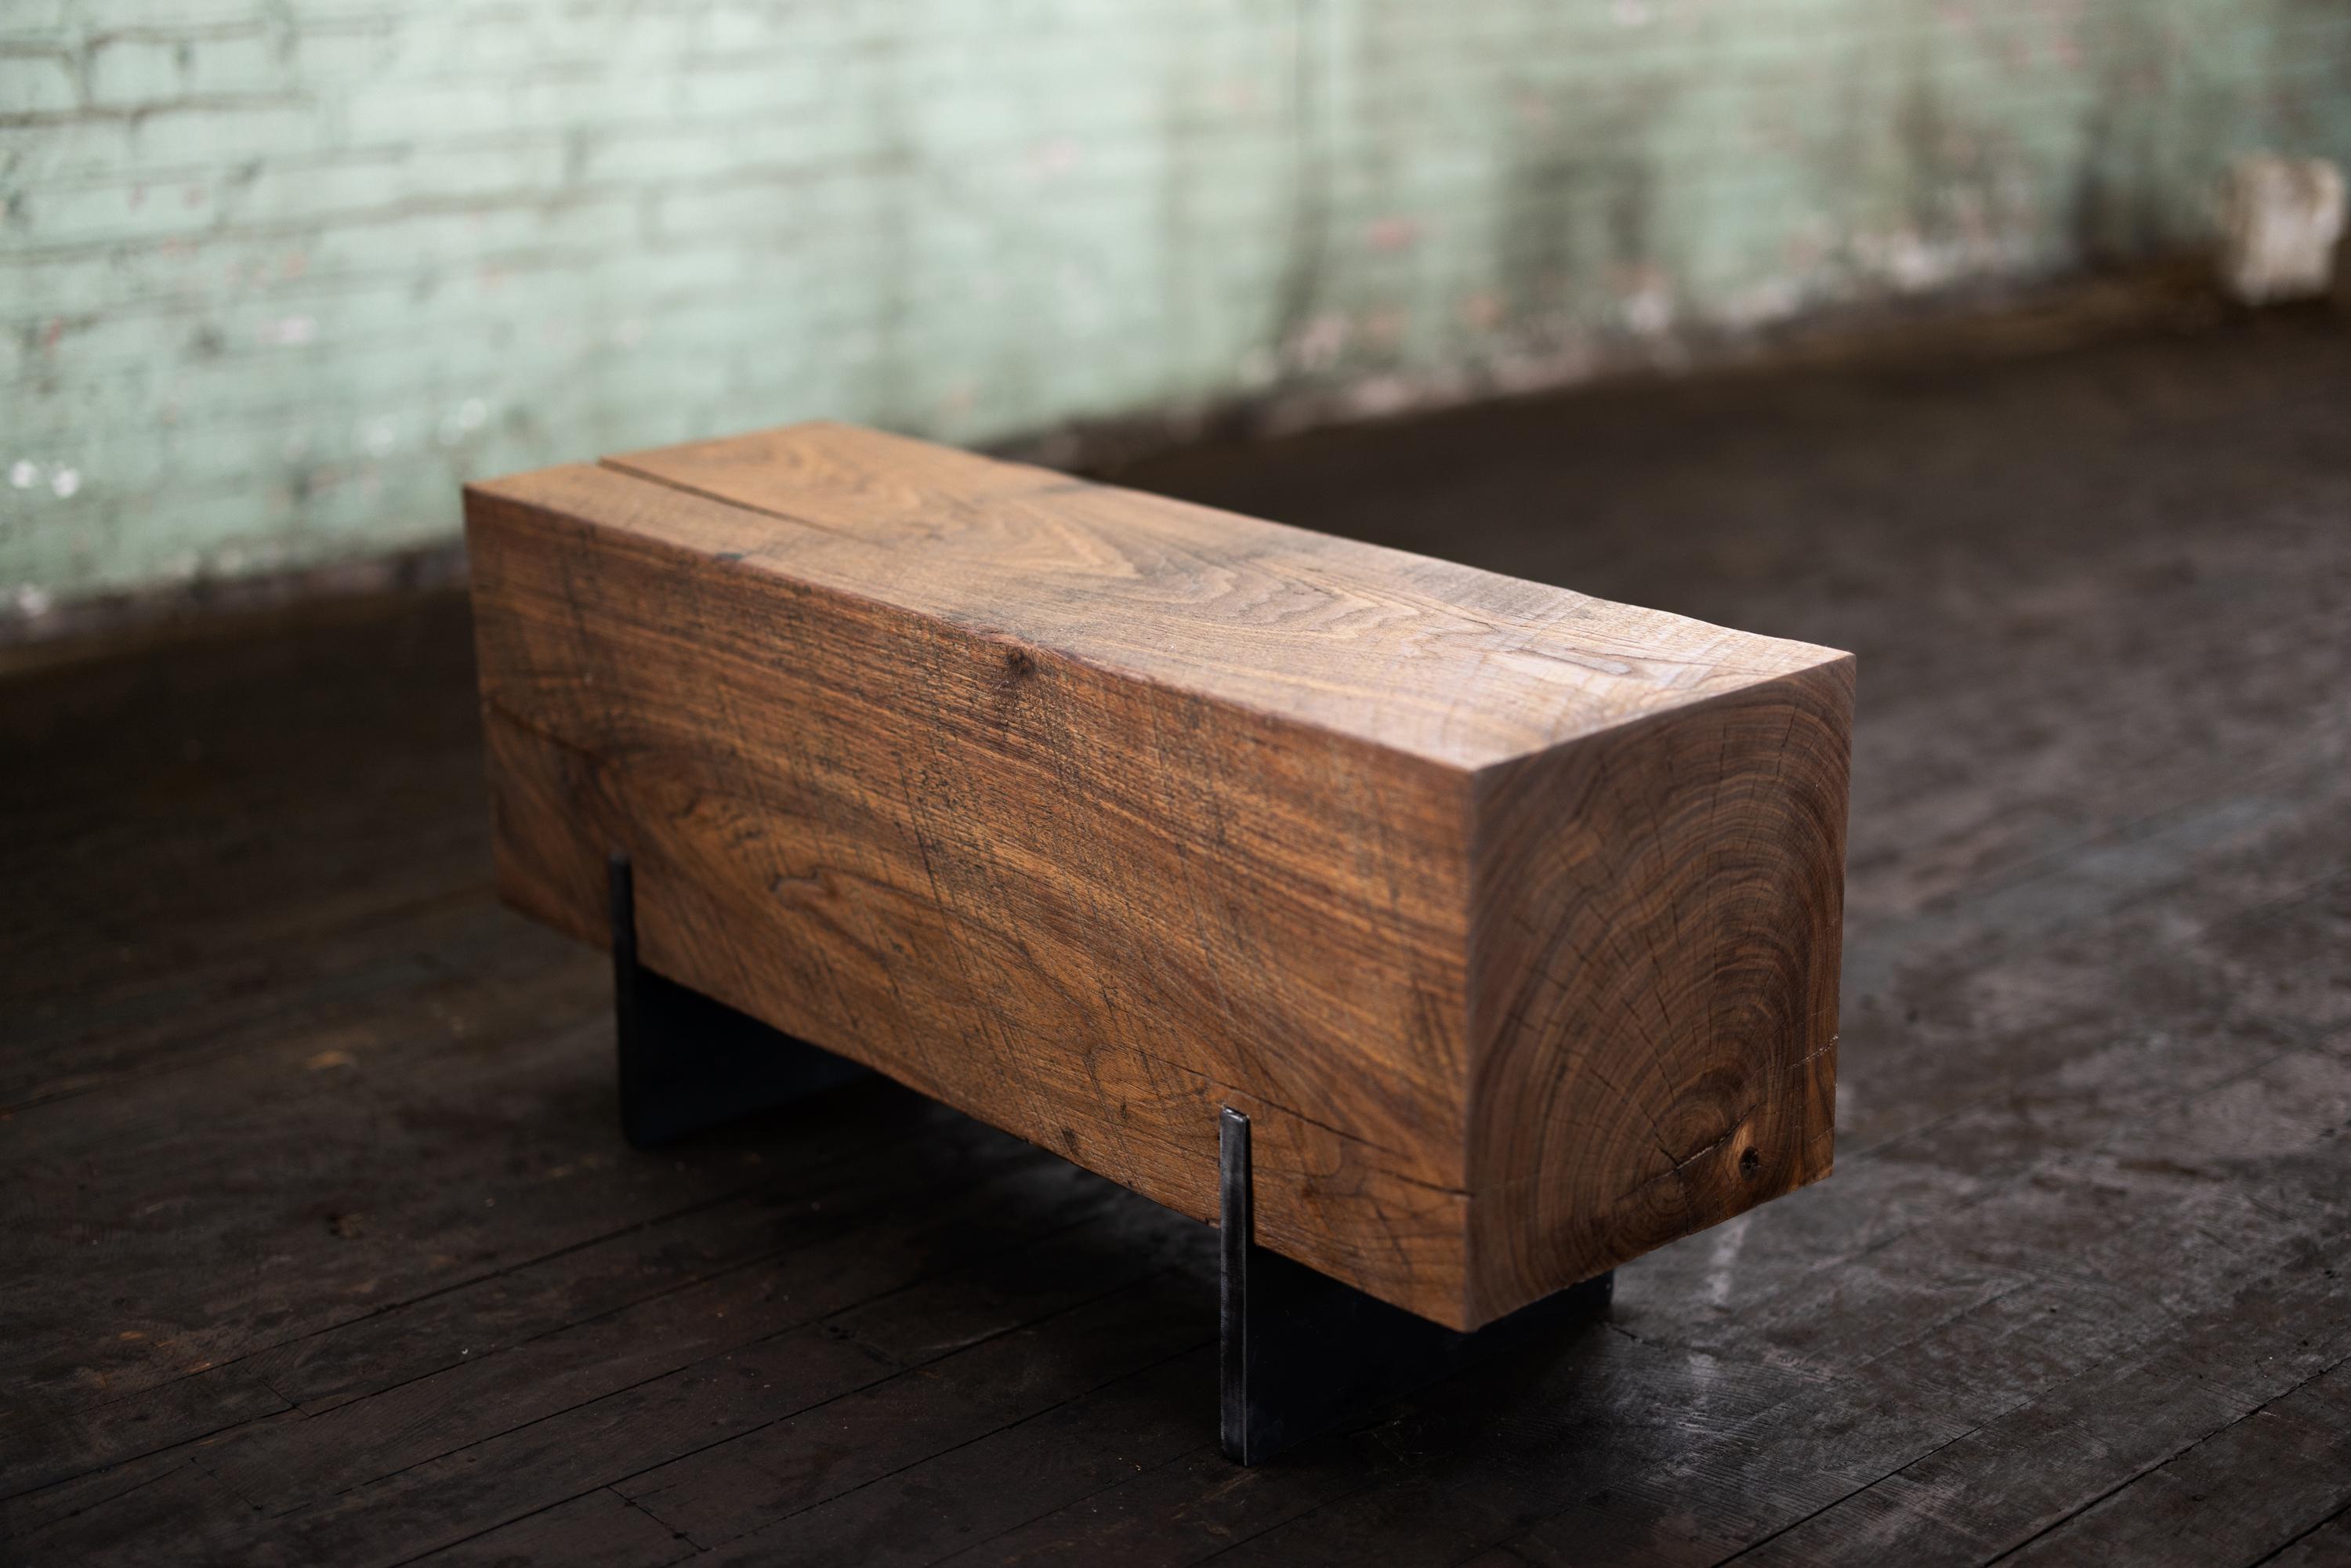 Rustic Knife Walnut Beam Bench 4' Solid Wood + Blackened Steel Bench by Alabama Sawyer For Sale